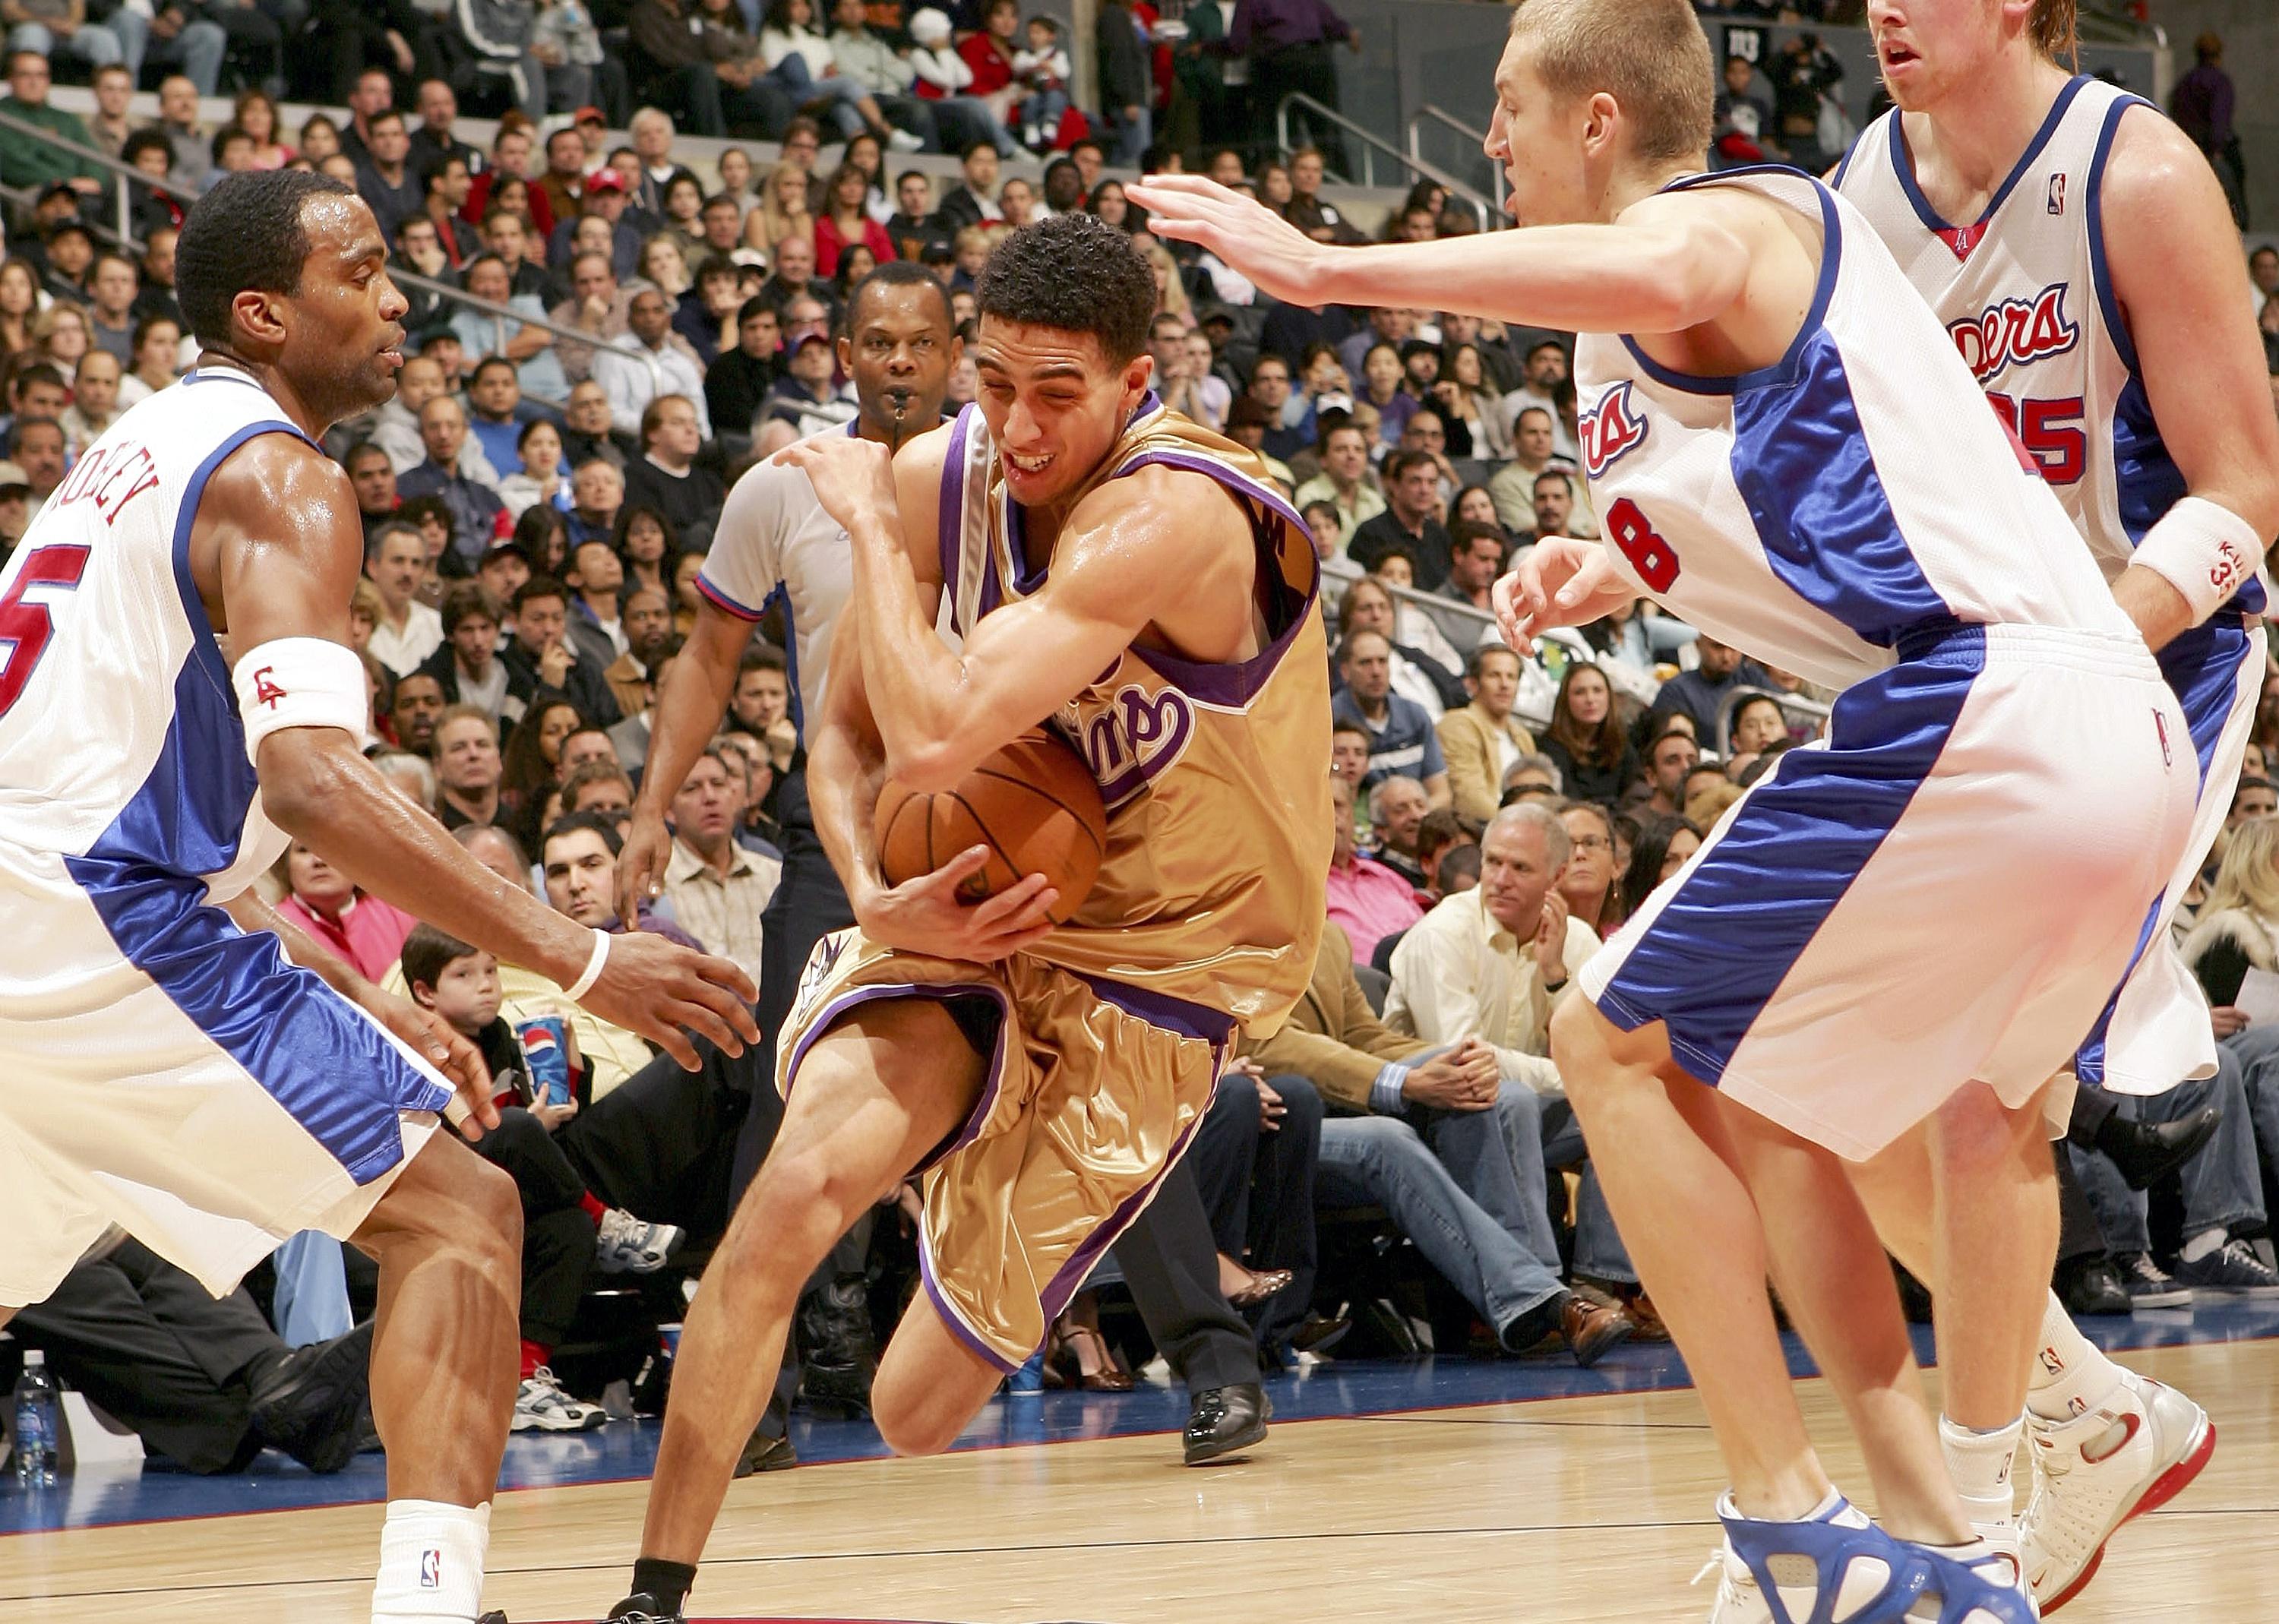 Kevin Martin drives to the basket during a game at Staples Center.